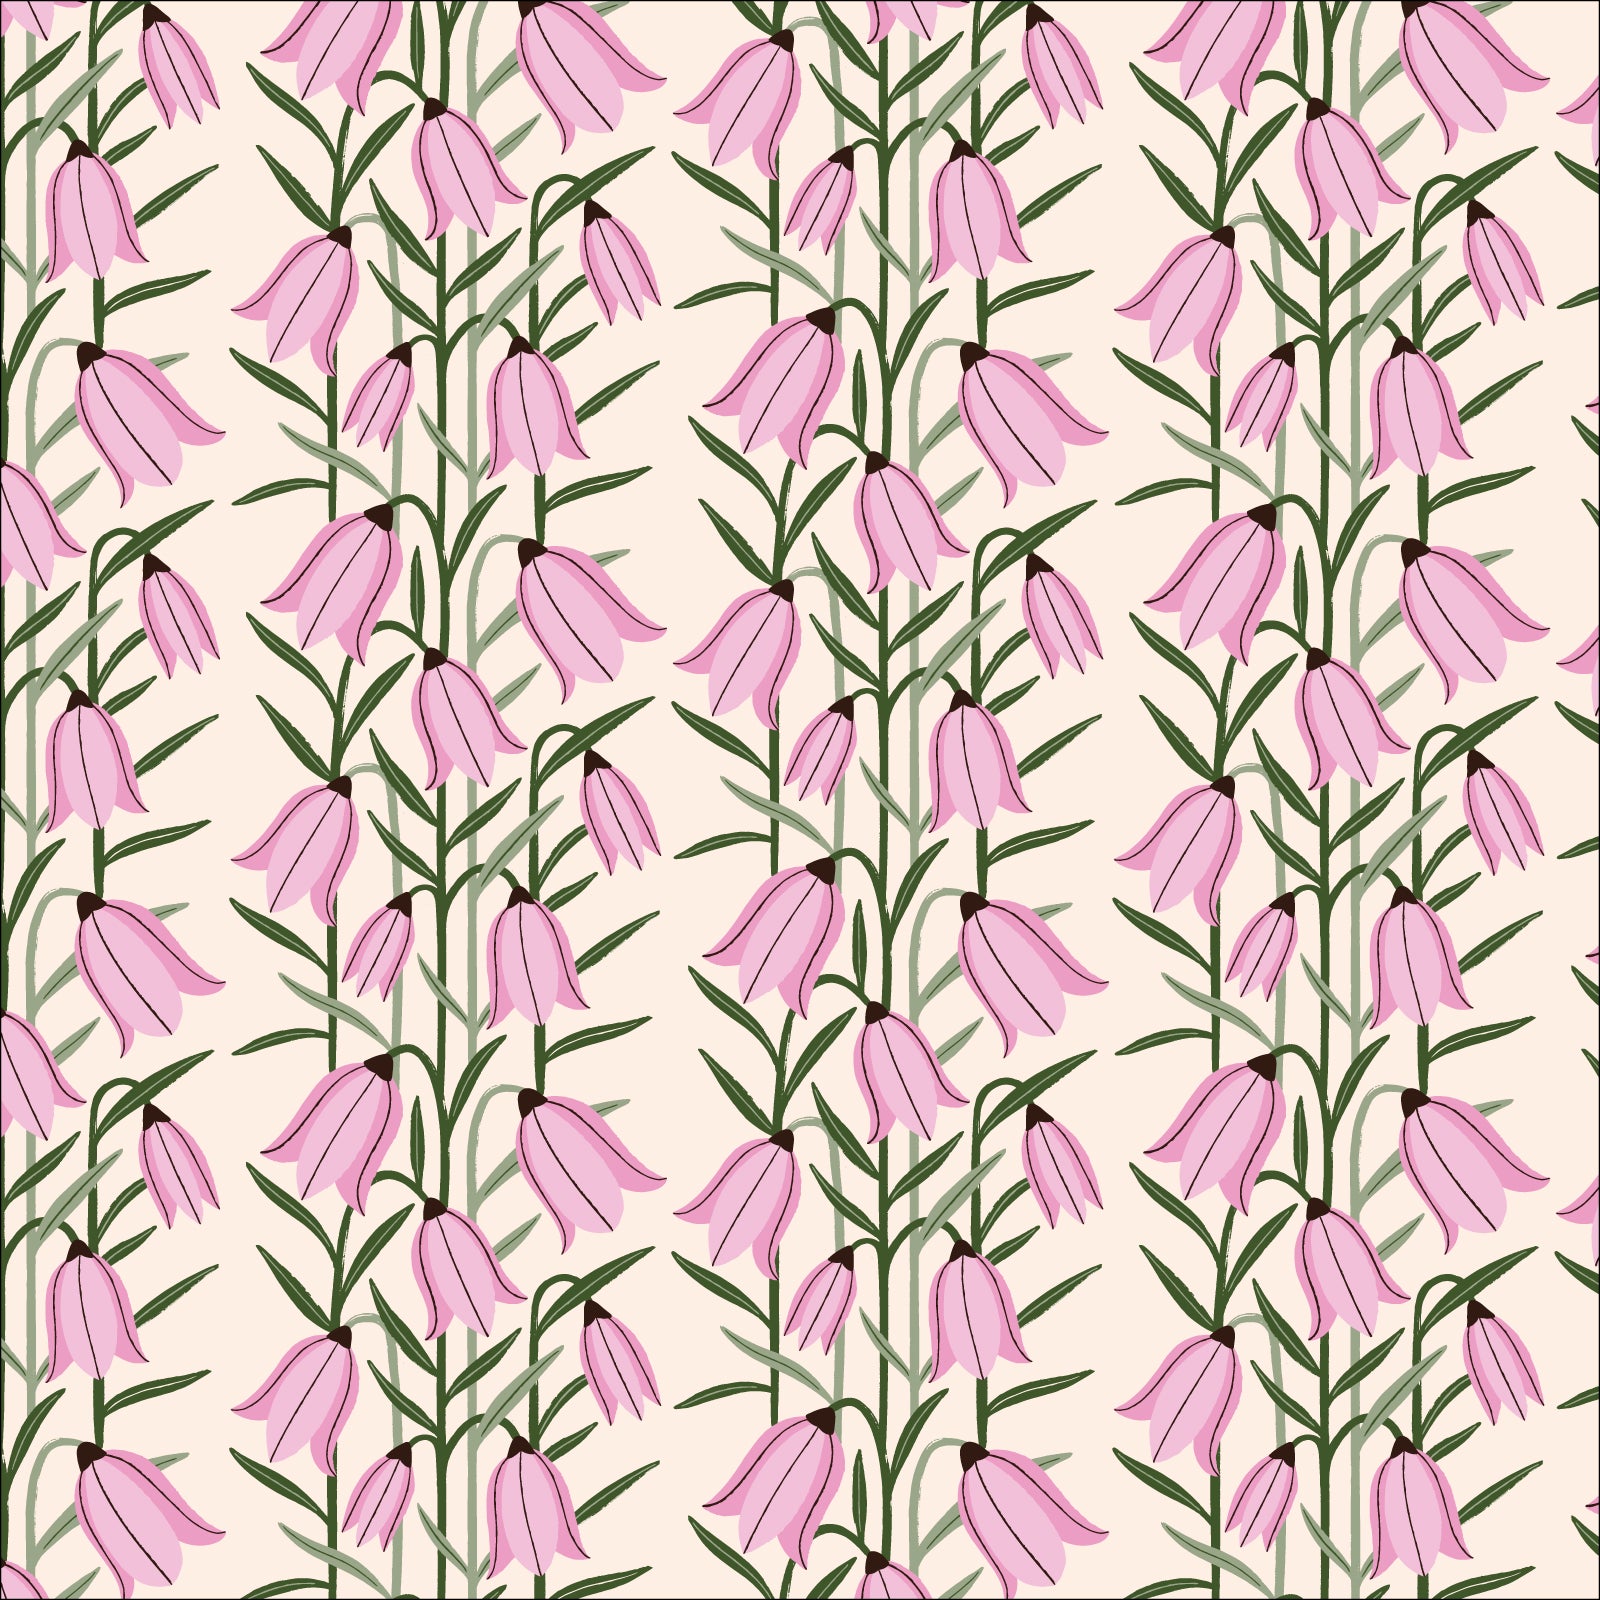 Wild Haven - Blooming Bells by Juliana Tipton for Cloud9 - Organic Cotton